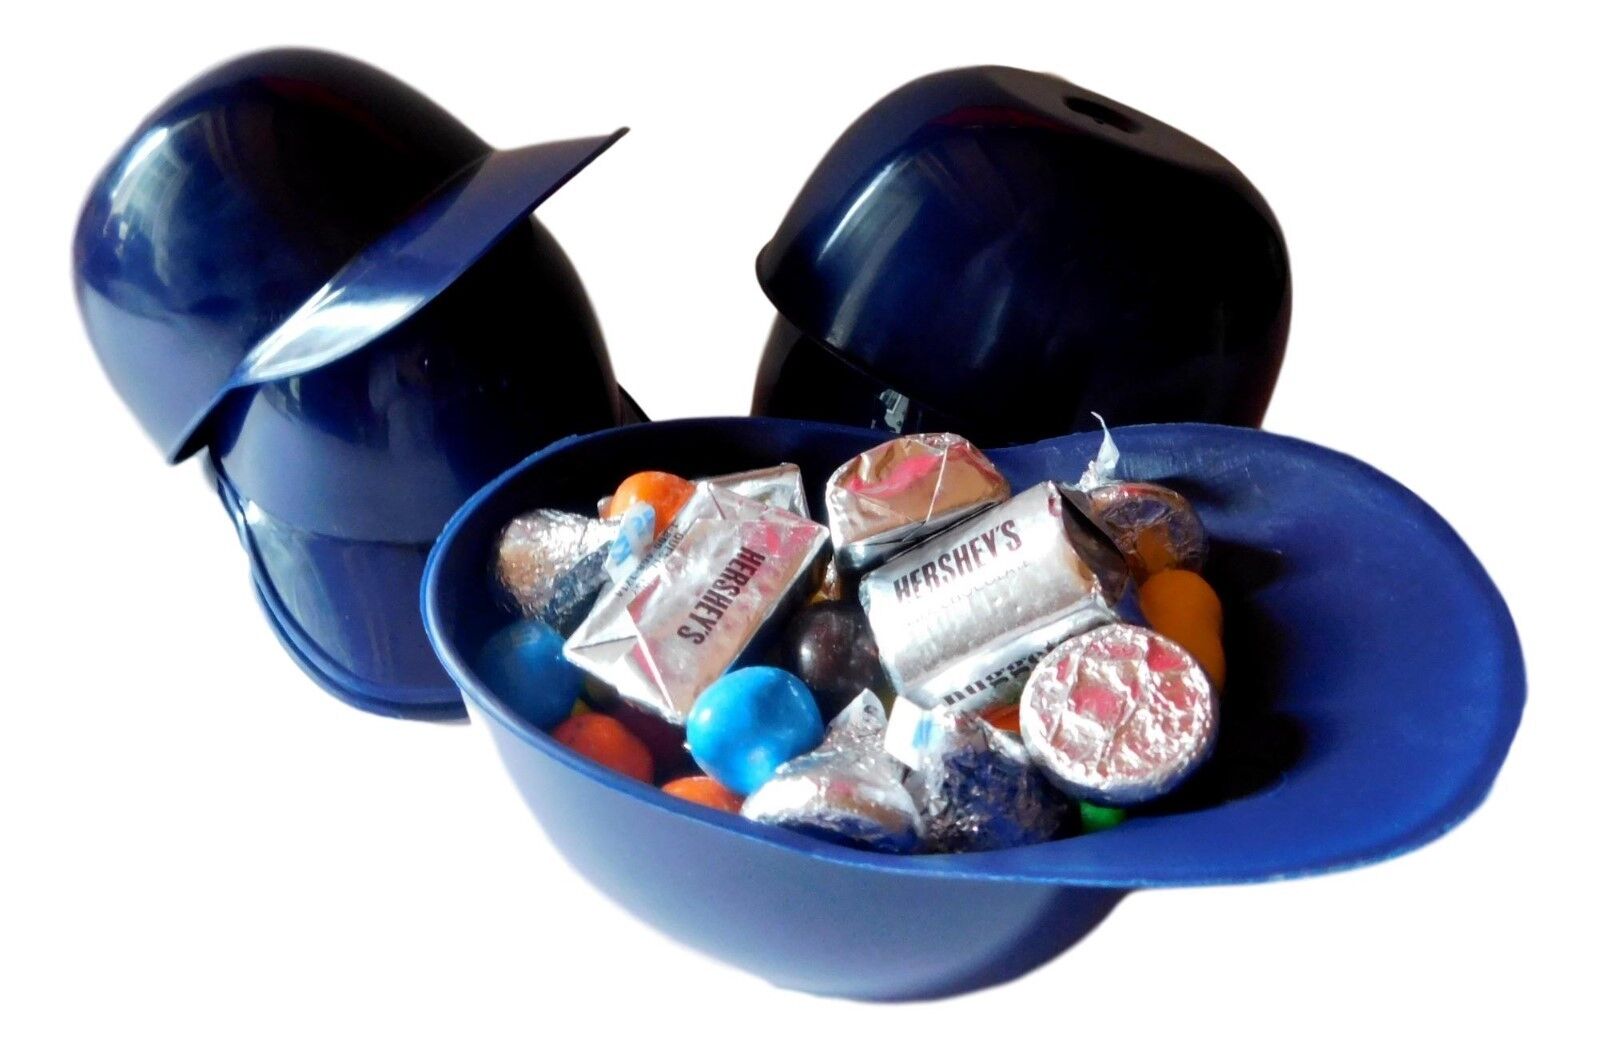 12 Baseball Caps Party Favors Made in USA, Recyclable 8 Colors Offered Jean's Plastics Does Not Apply - фотография #4